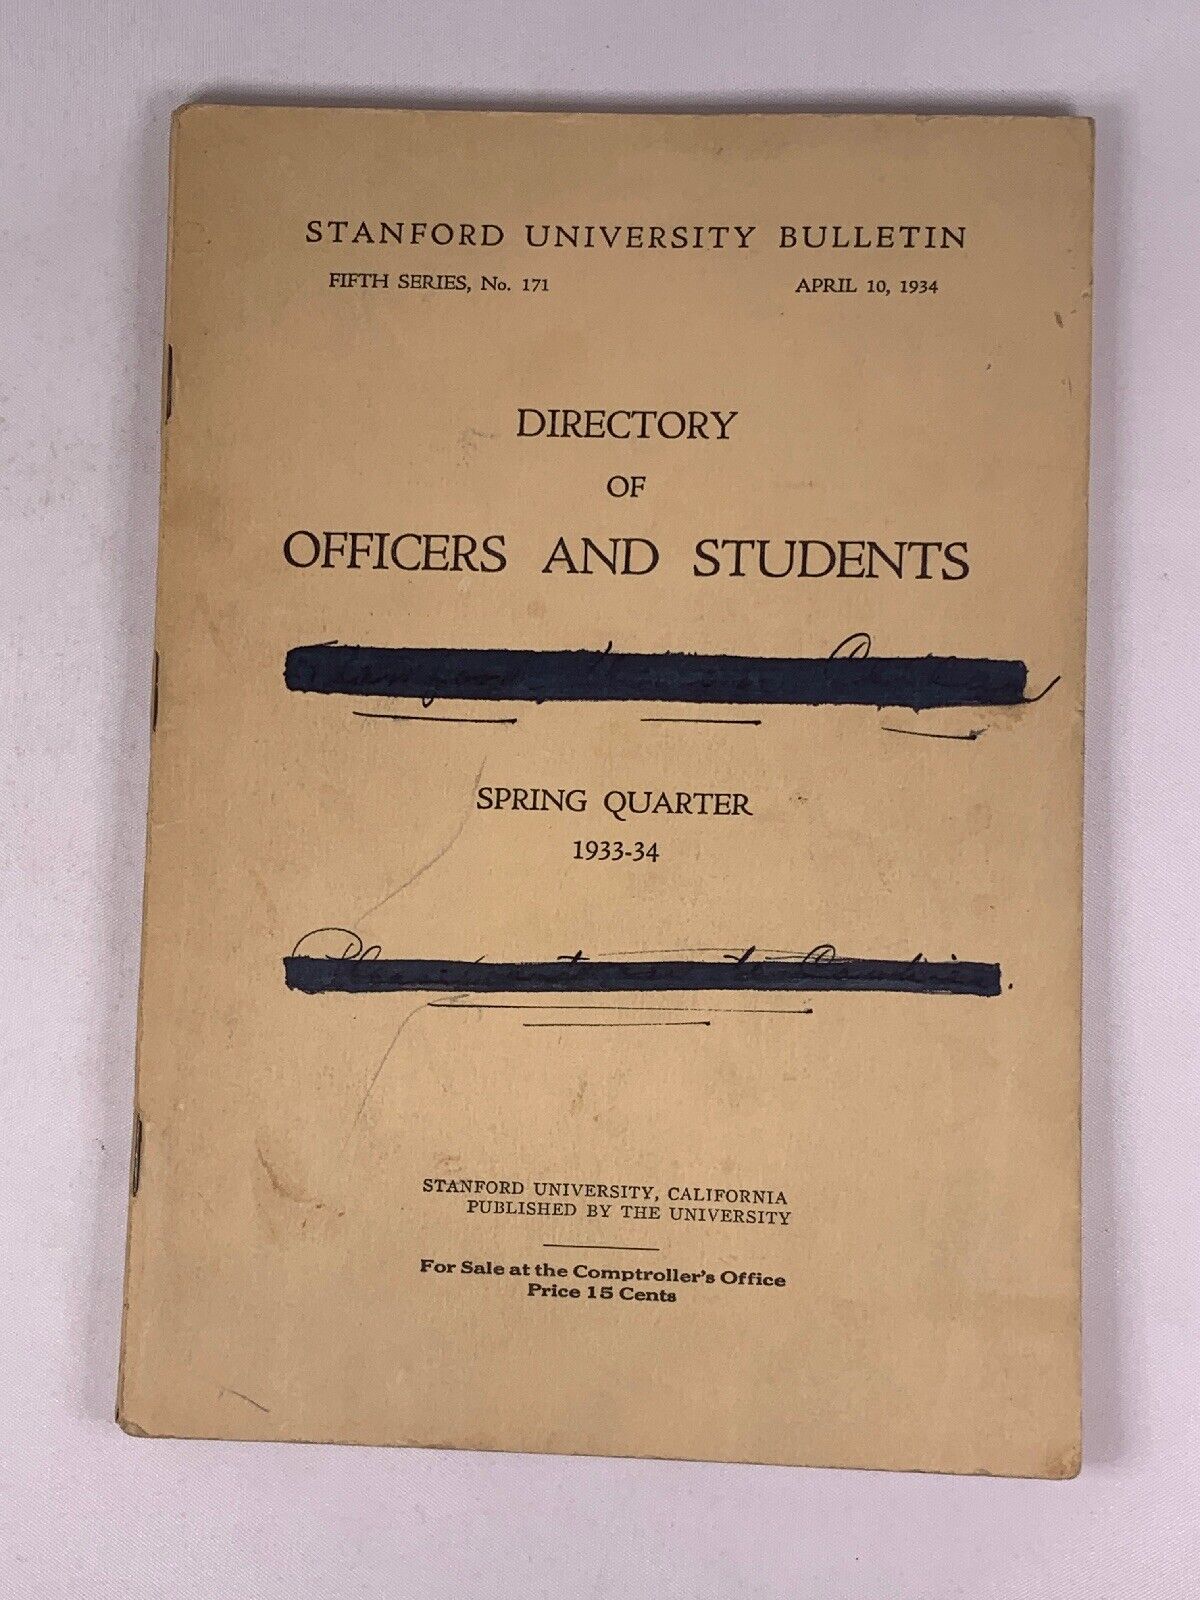 Stanford University 1934 Directory Of Officers And Students Spring Quarter 1933